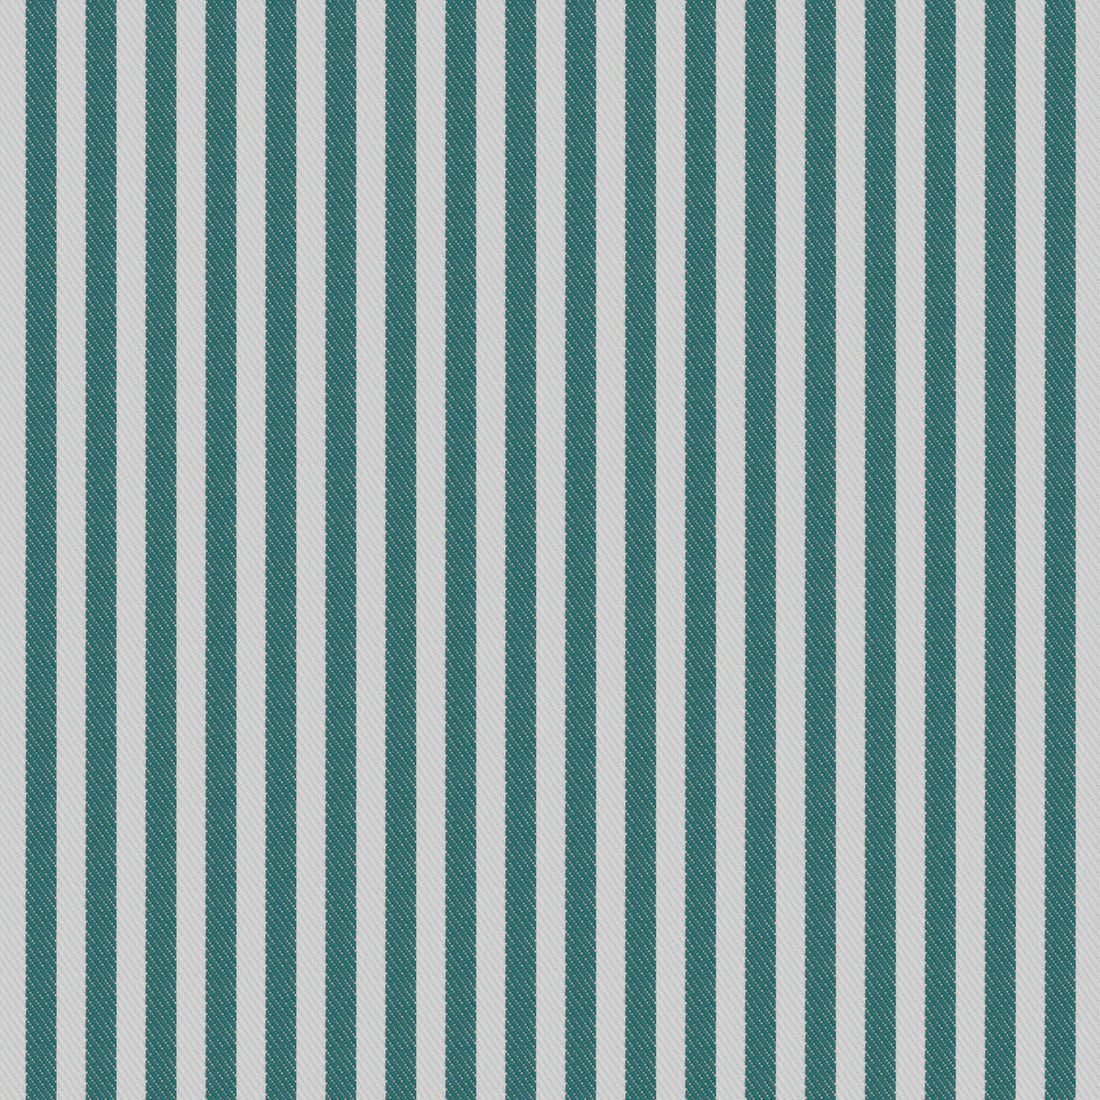 Calobra fabric in agua color - pattern GDT5684.004.0 - by Gaston y Daniela in the Gaston Maiorica collection